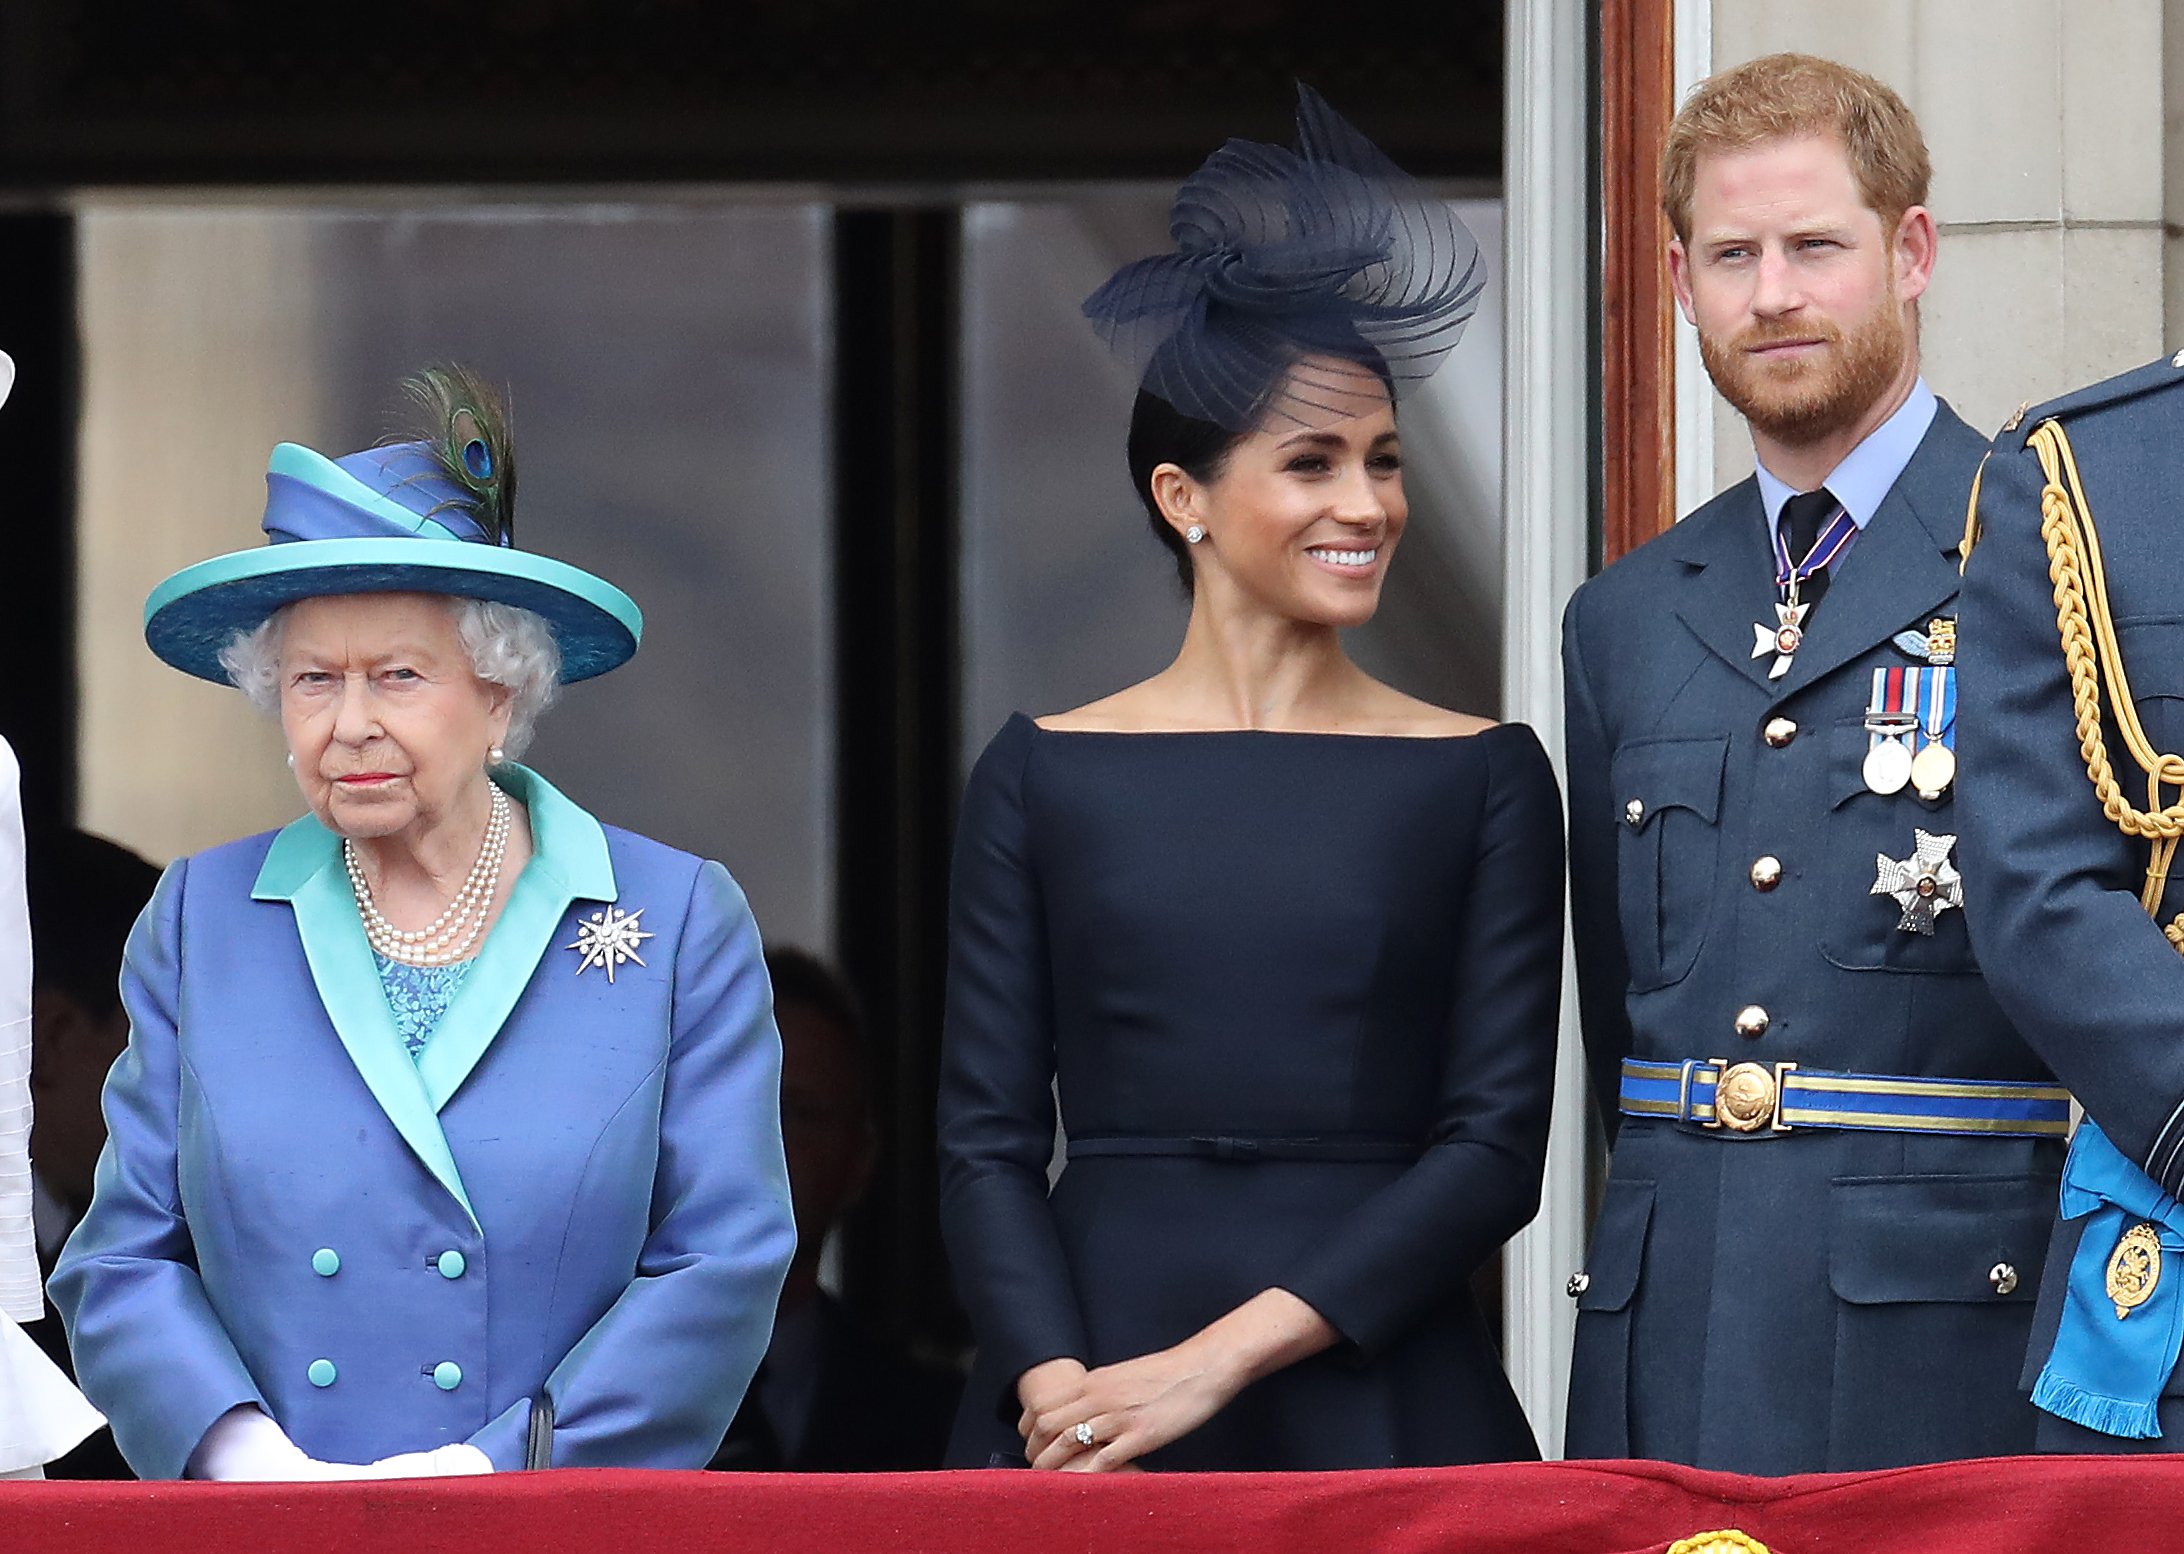 Queen Elizabeth II, Prince Harry, Duke of Sussex and Meghan, Duchess of Sussex on the balcony of Buckingham Palace as the Royal family attend events to mark the Centenary of the RAF on July 10, 2018 in London, England. | Source: Getty Images